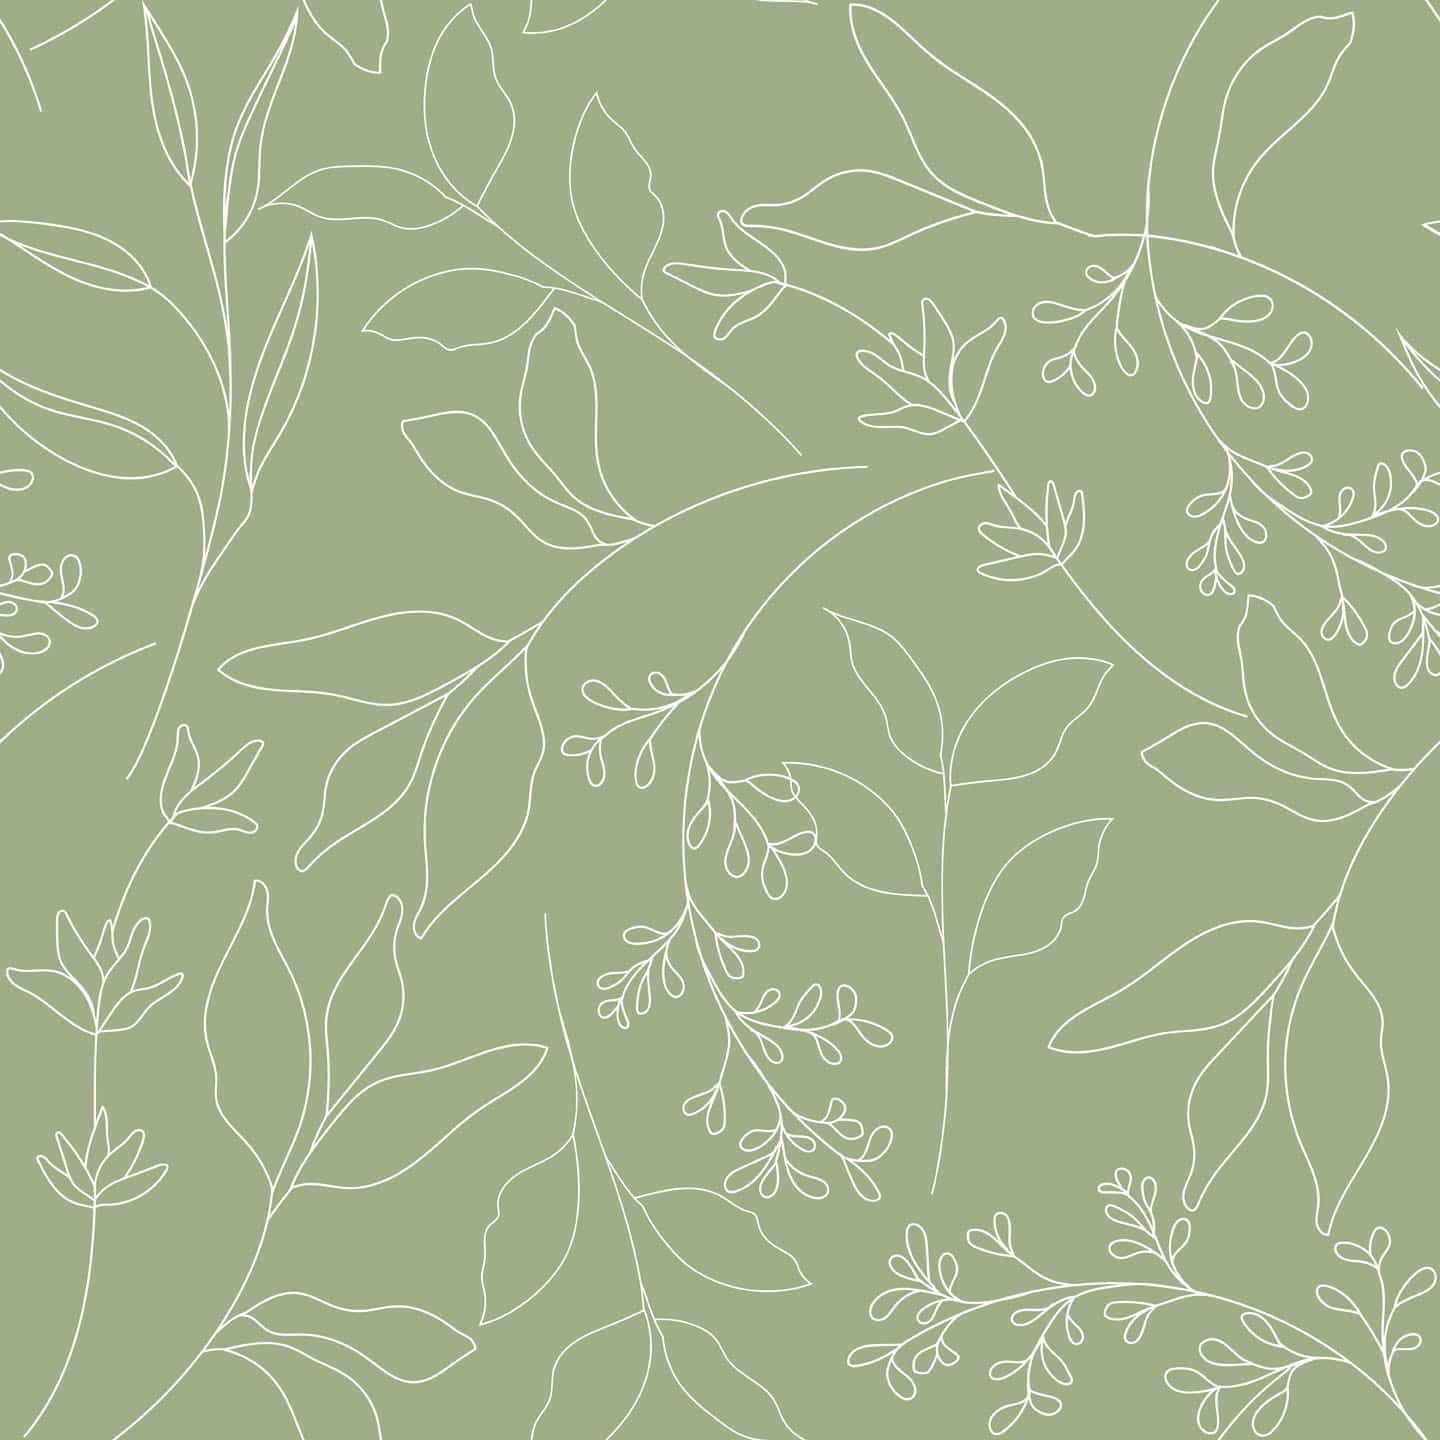 A hand illustrated pattern of white leaves and branches on a sage green background - Sage green